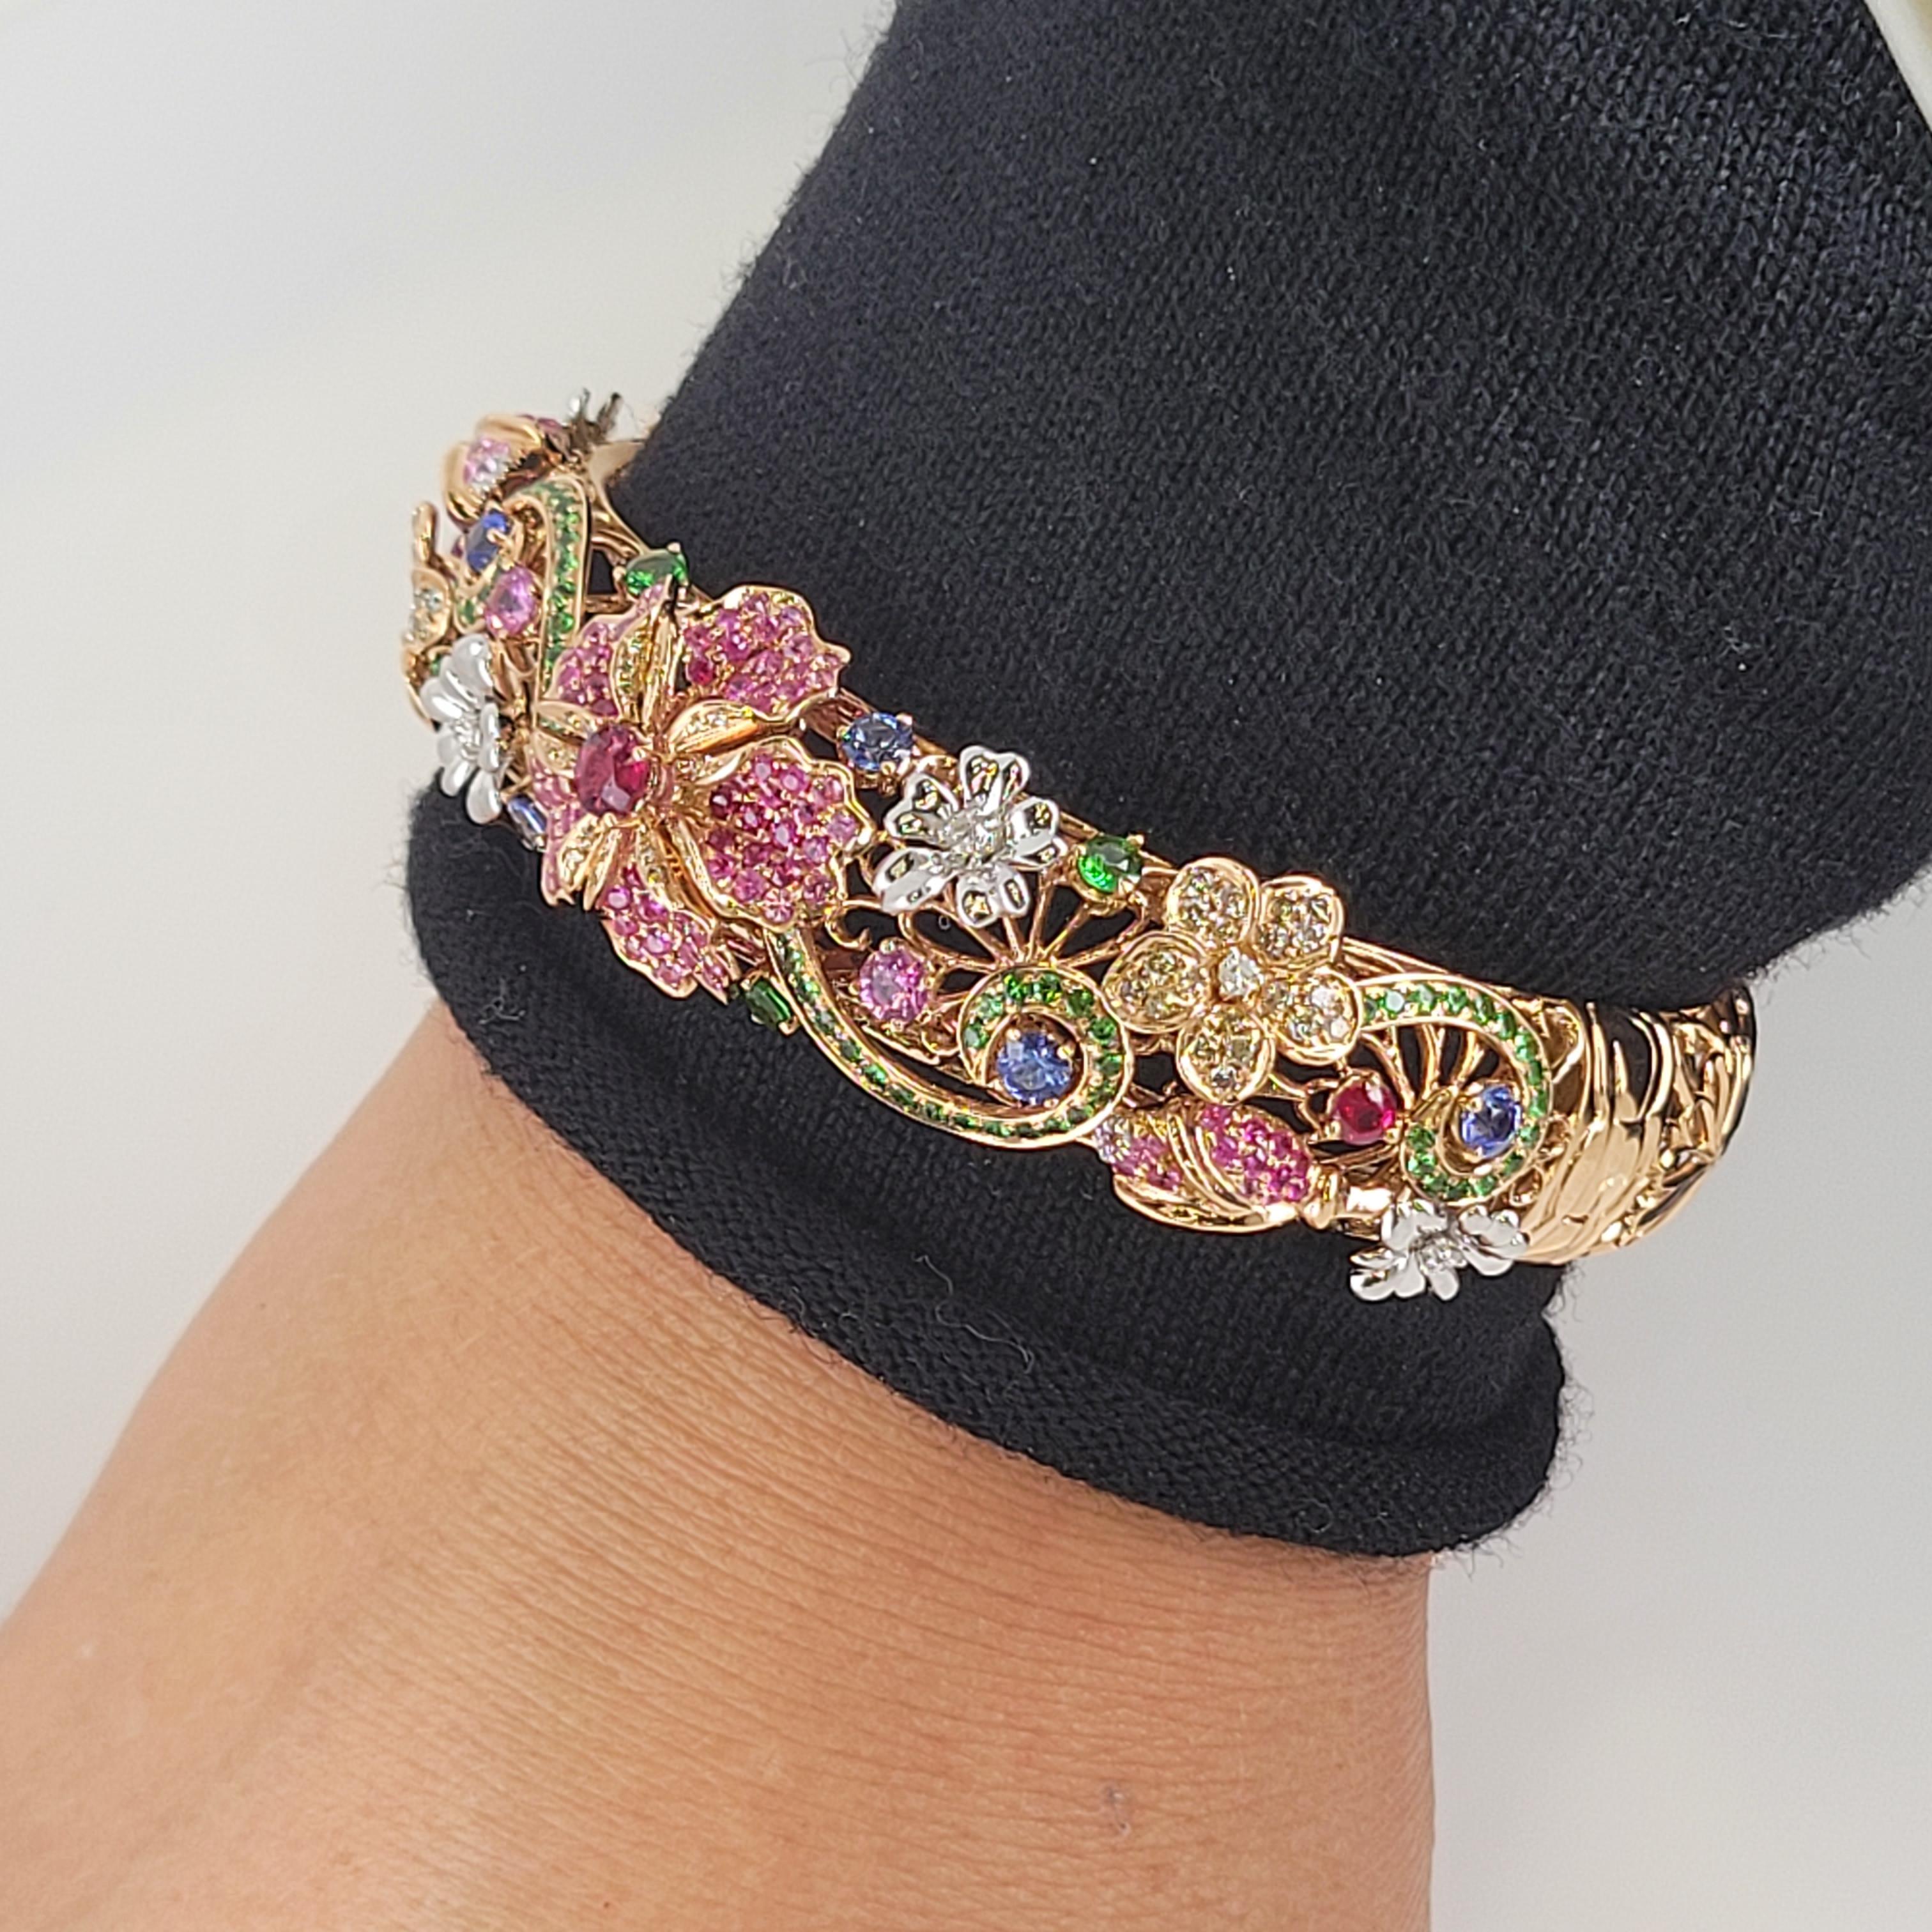 18k Flower Garden Collection Bracelet with Diamonds, Tourmaline, Sapphires, Ruby For Sale 2